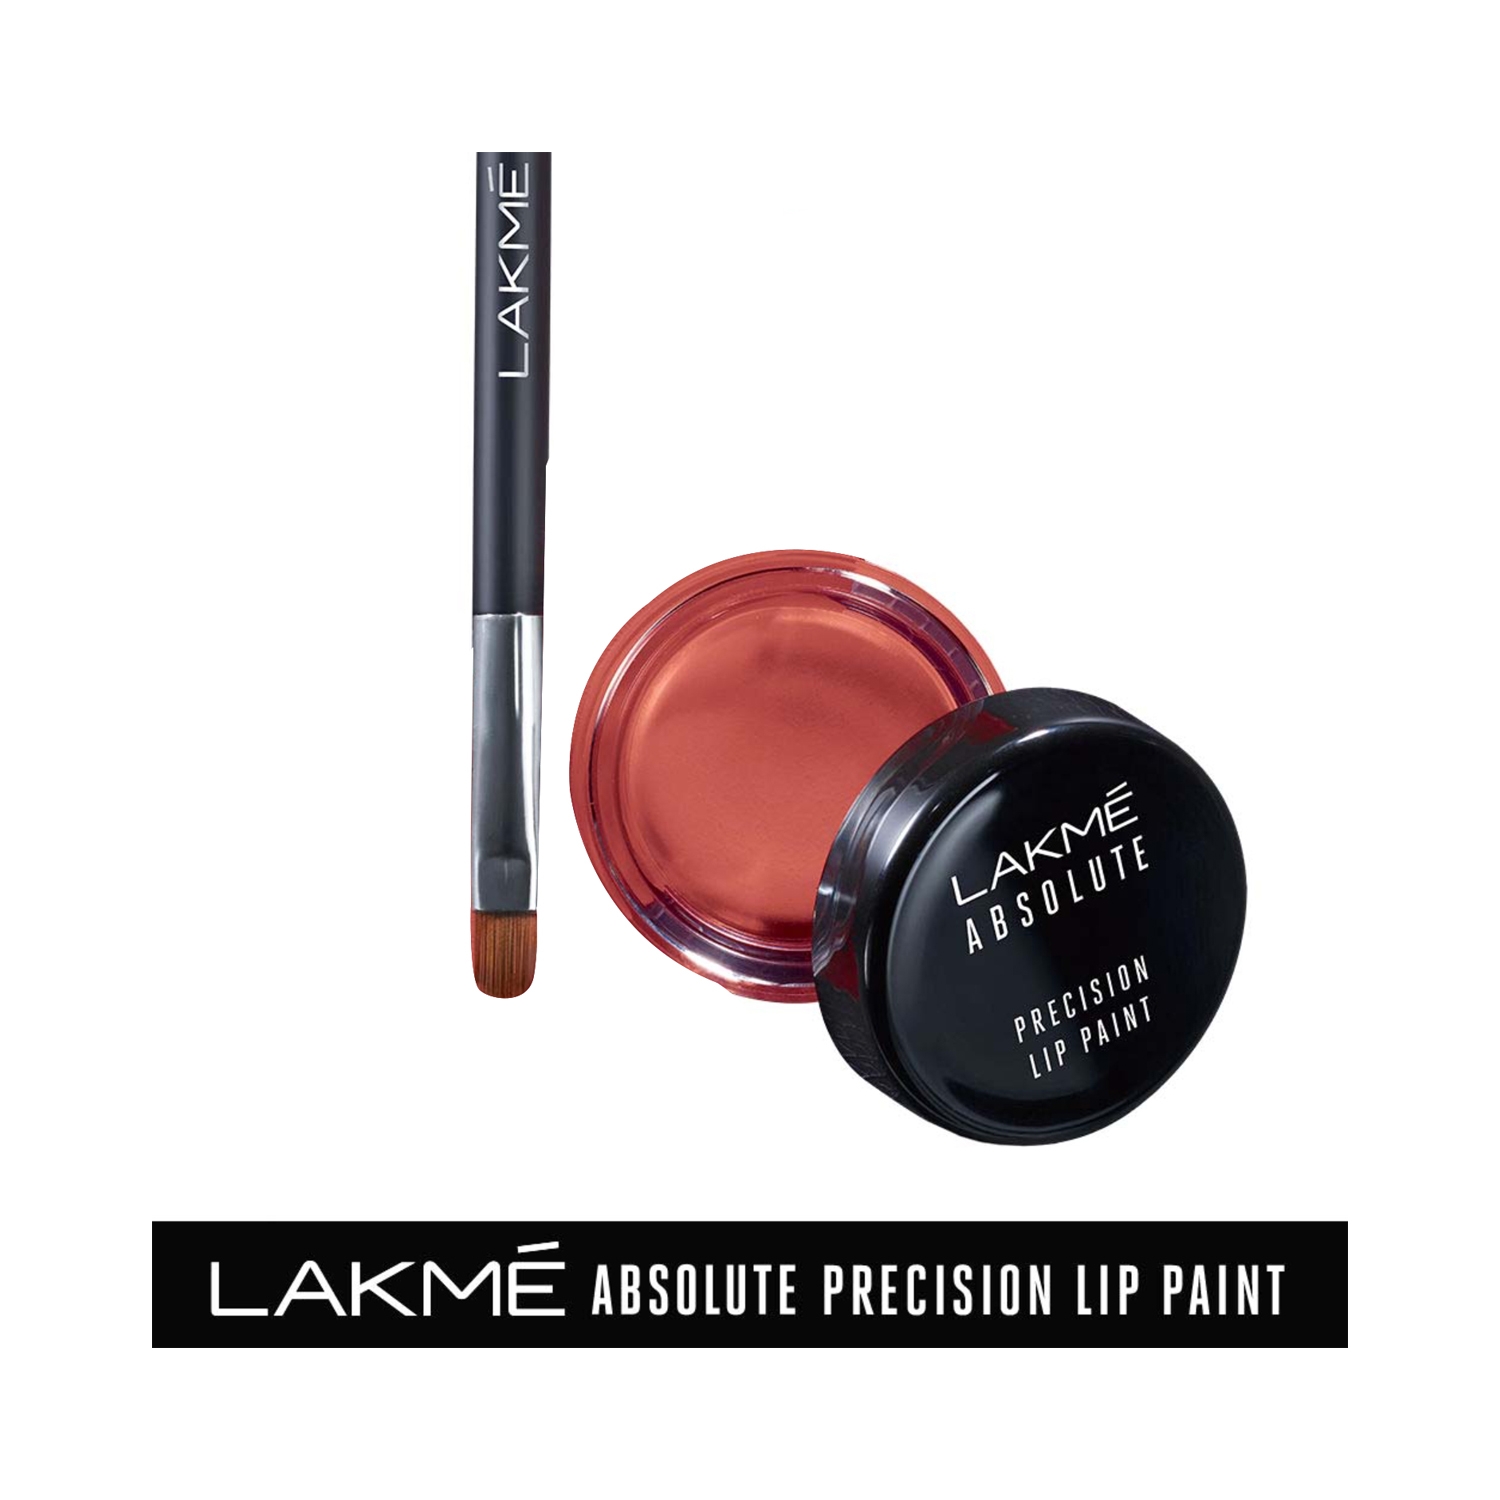 Lakme | Lakme Absolute Precision Lip Paint - Alluring Nude (3g)